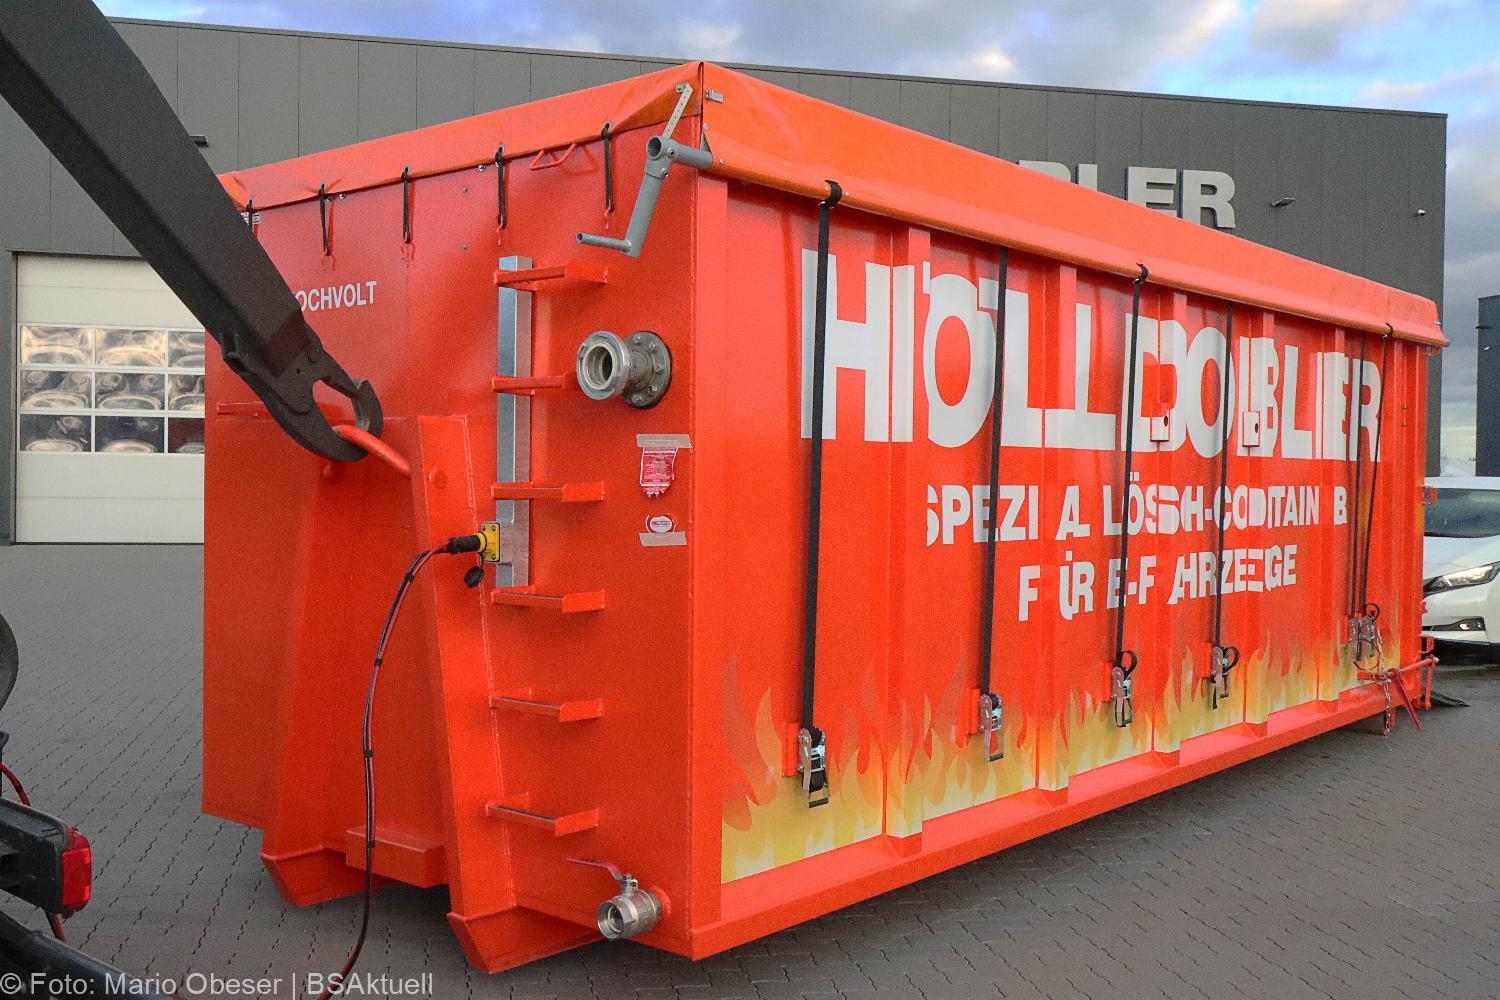 AB-Hochvoltcontainer Hoelldobler 18022021 14